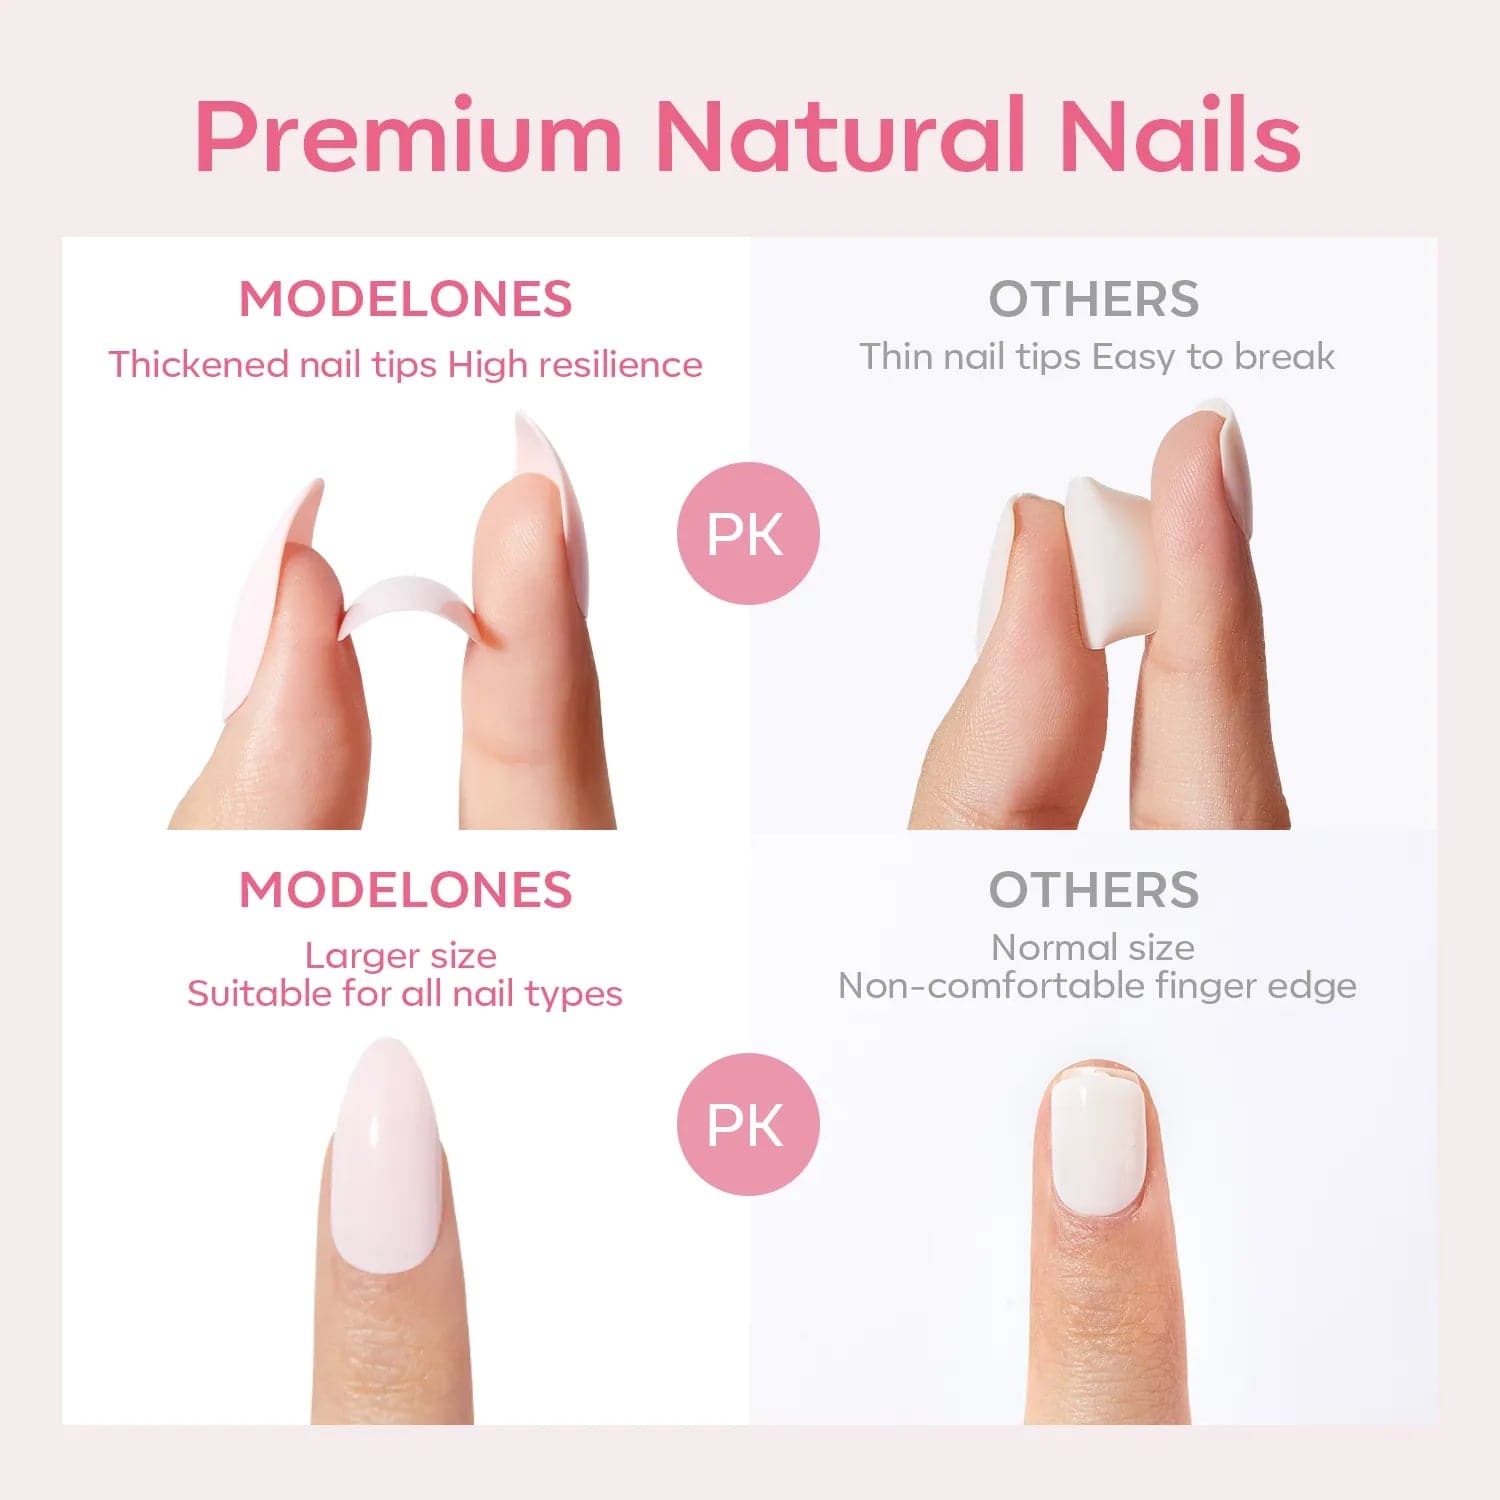 Acrylic Nails: Everything You Need To Know - Tipsy Nail Club